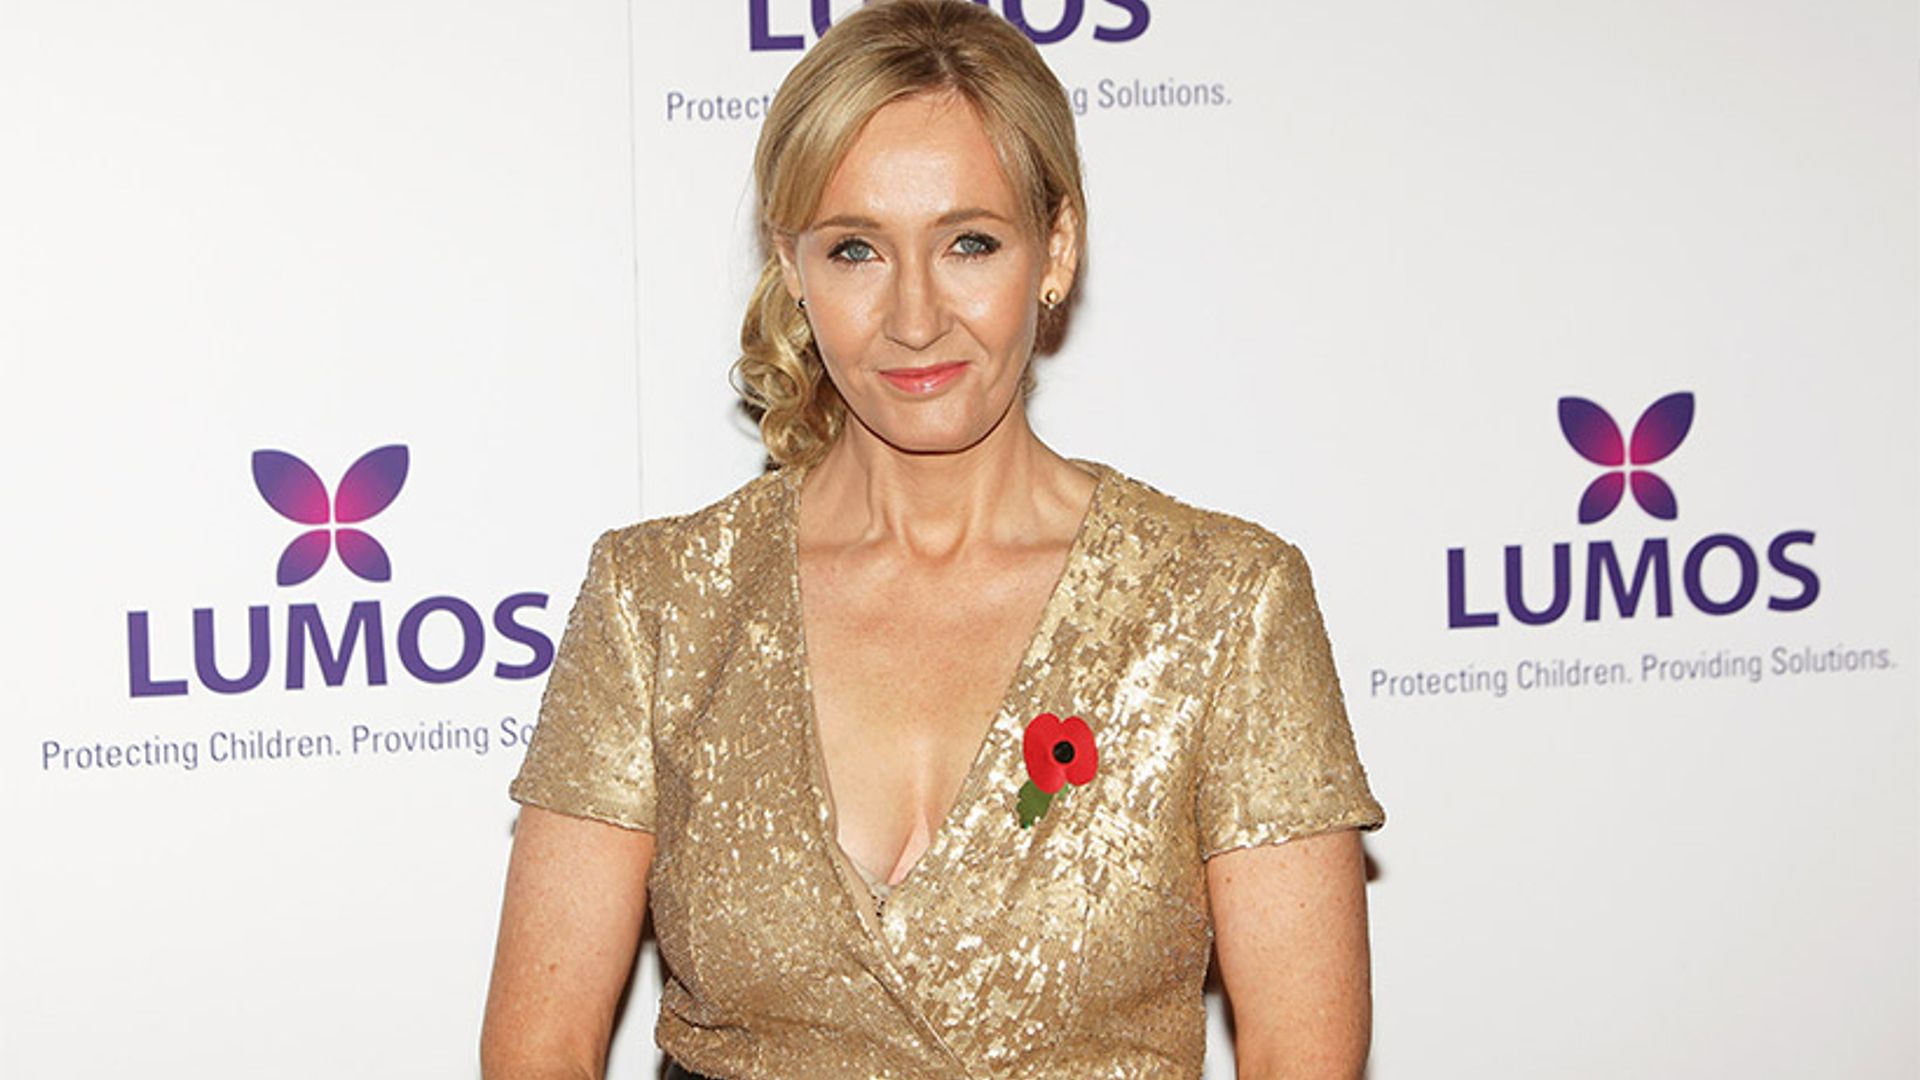 JK Rowling announces the title of her latest novel